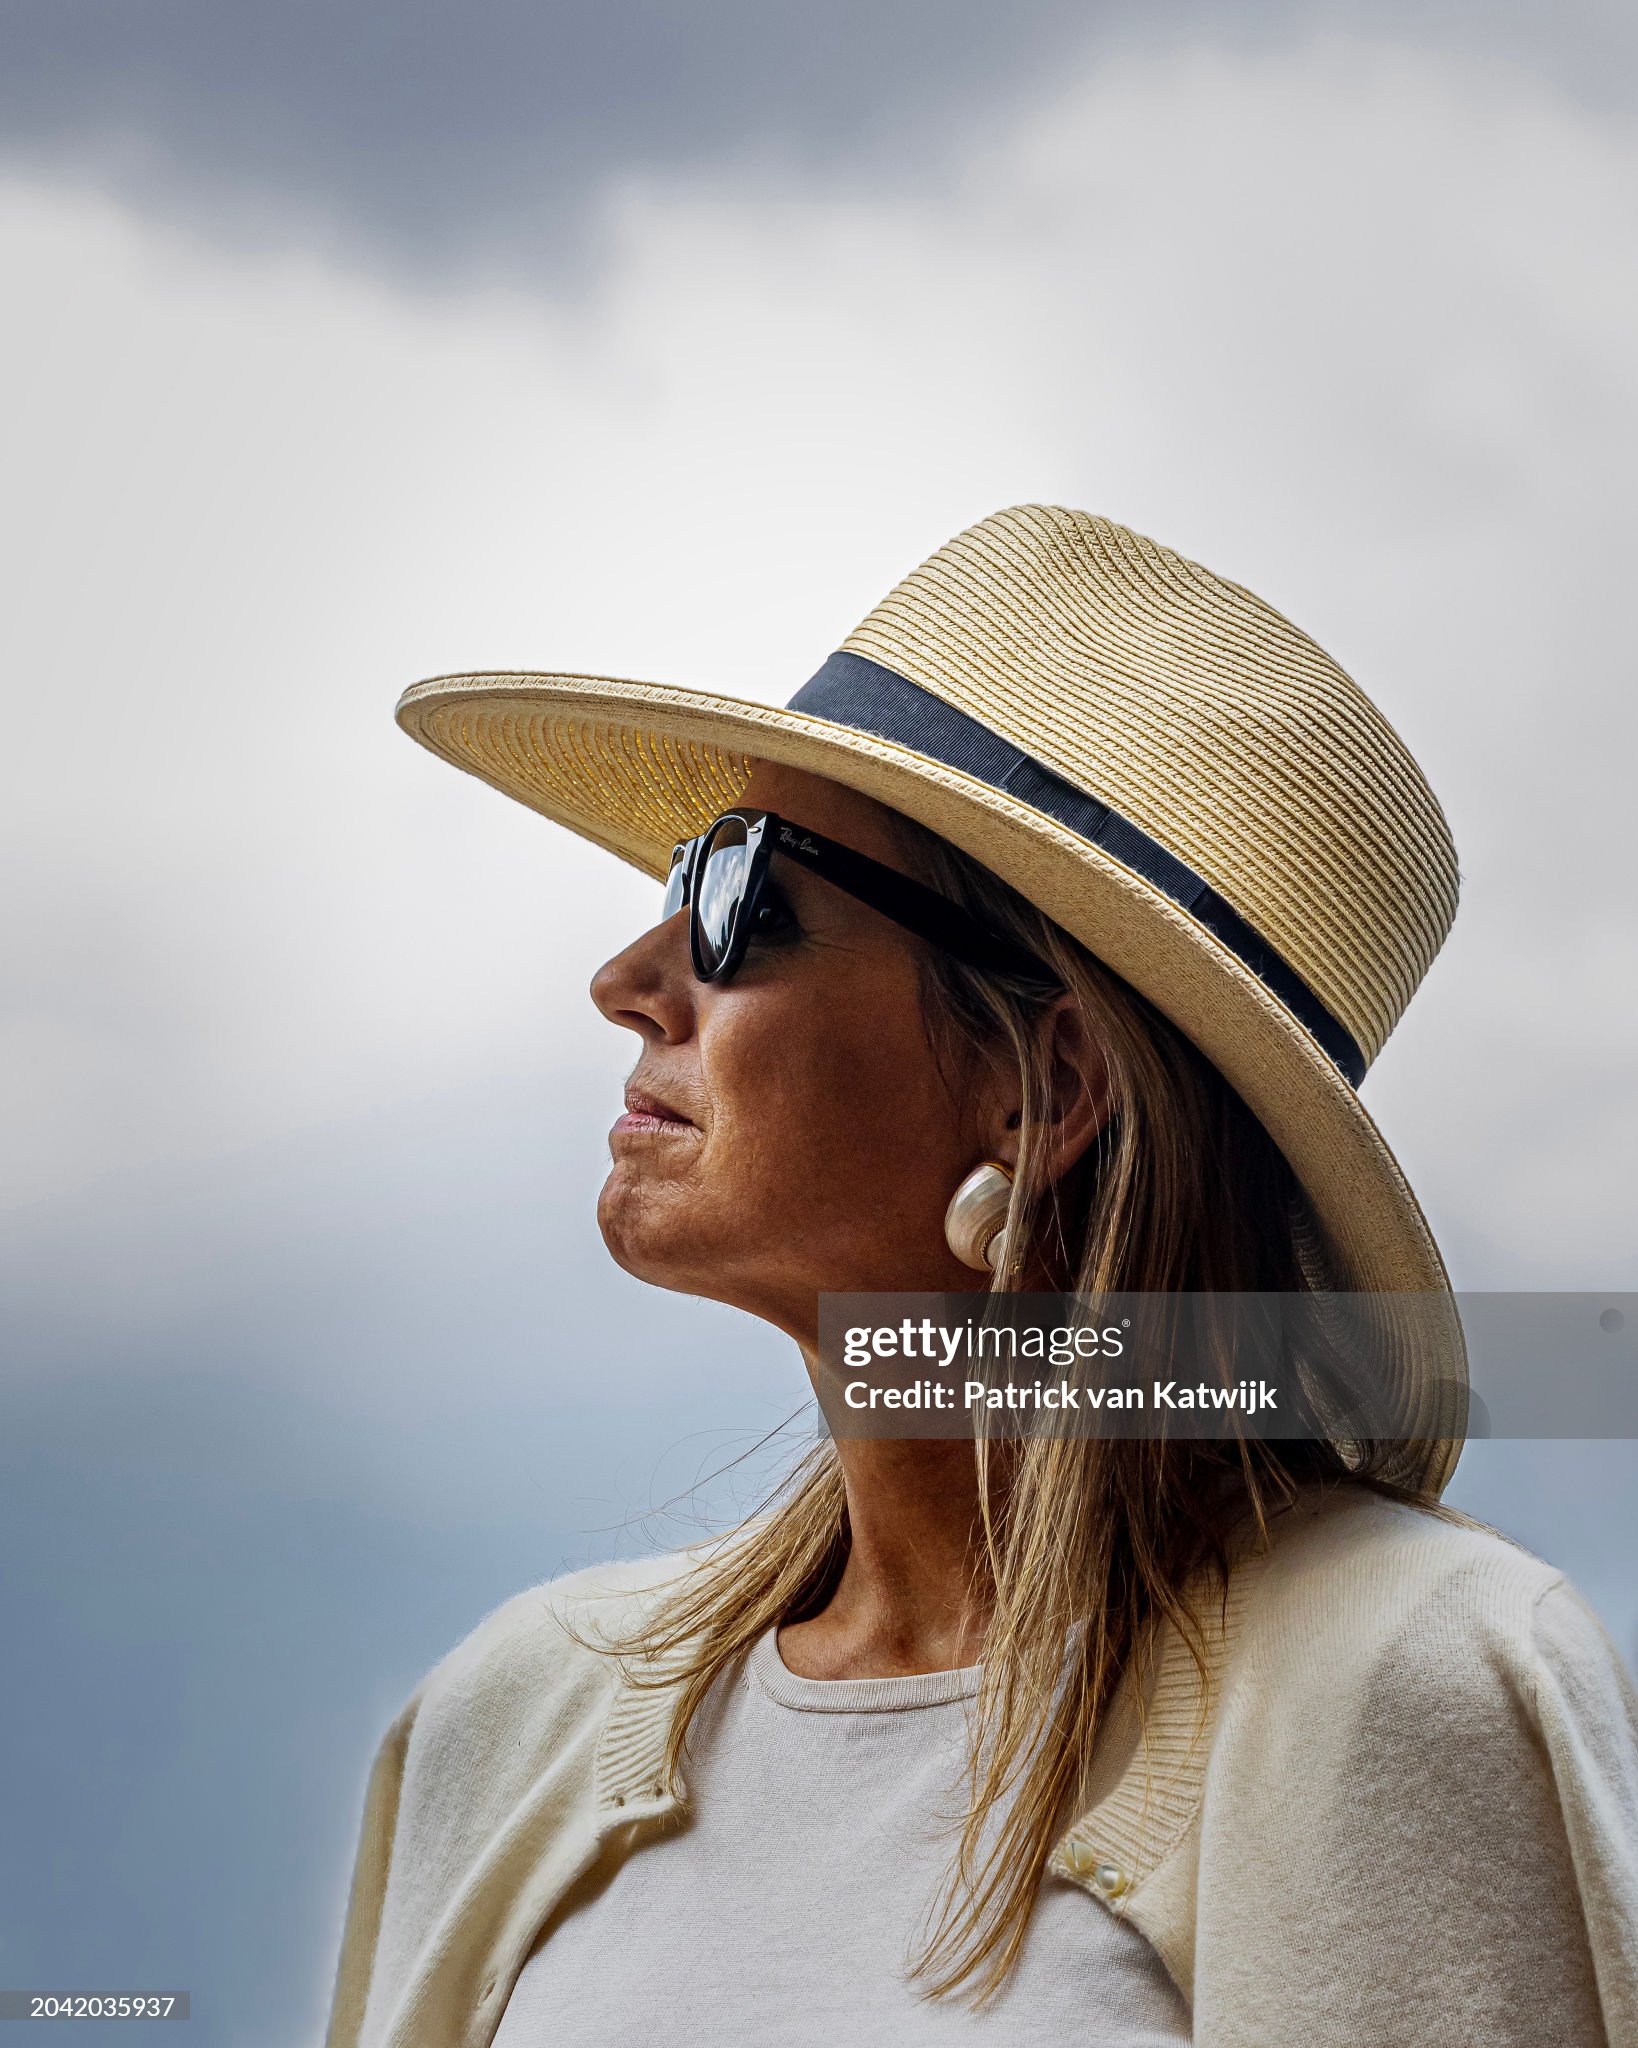 queen-maxima-of-the-netherlands-visits-colombia-day-one.jpg?s=2048x2048&w=gi&k=20&c=oXEoAgMOH-4ky4JJ1ZjY1w19XSaFMA5nOWmBUOUtnkQ=